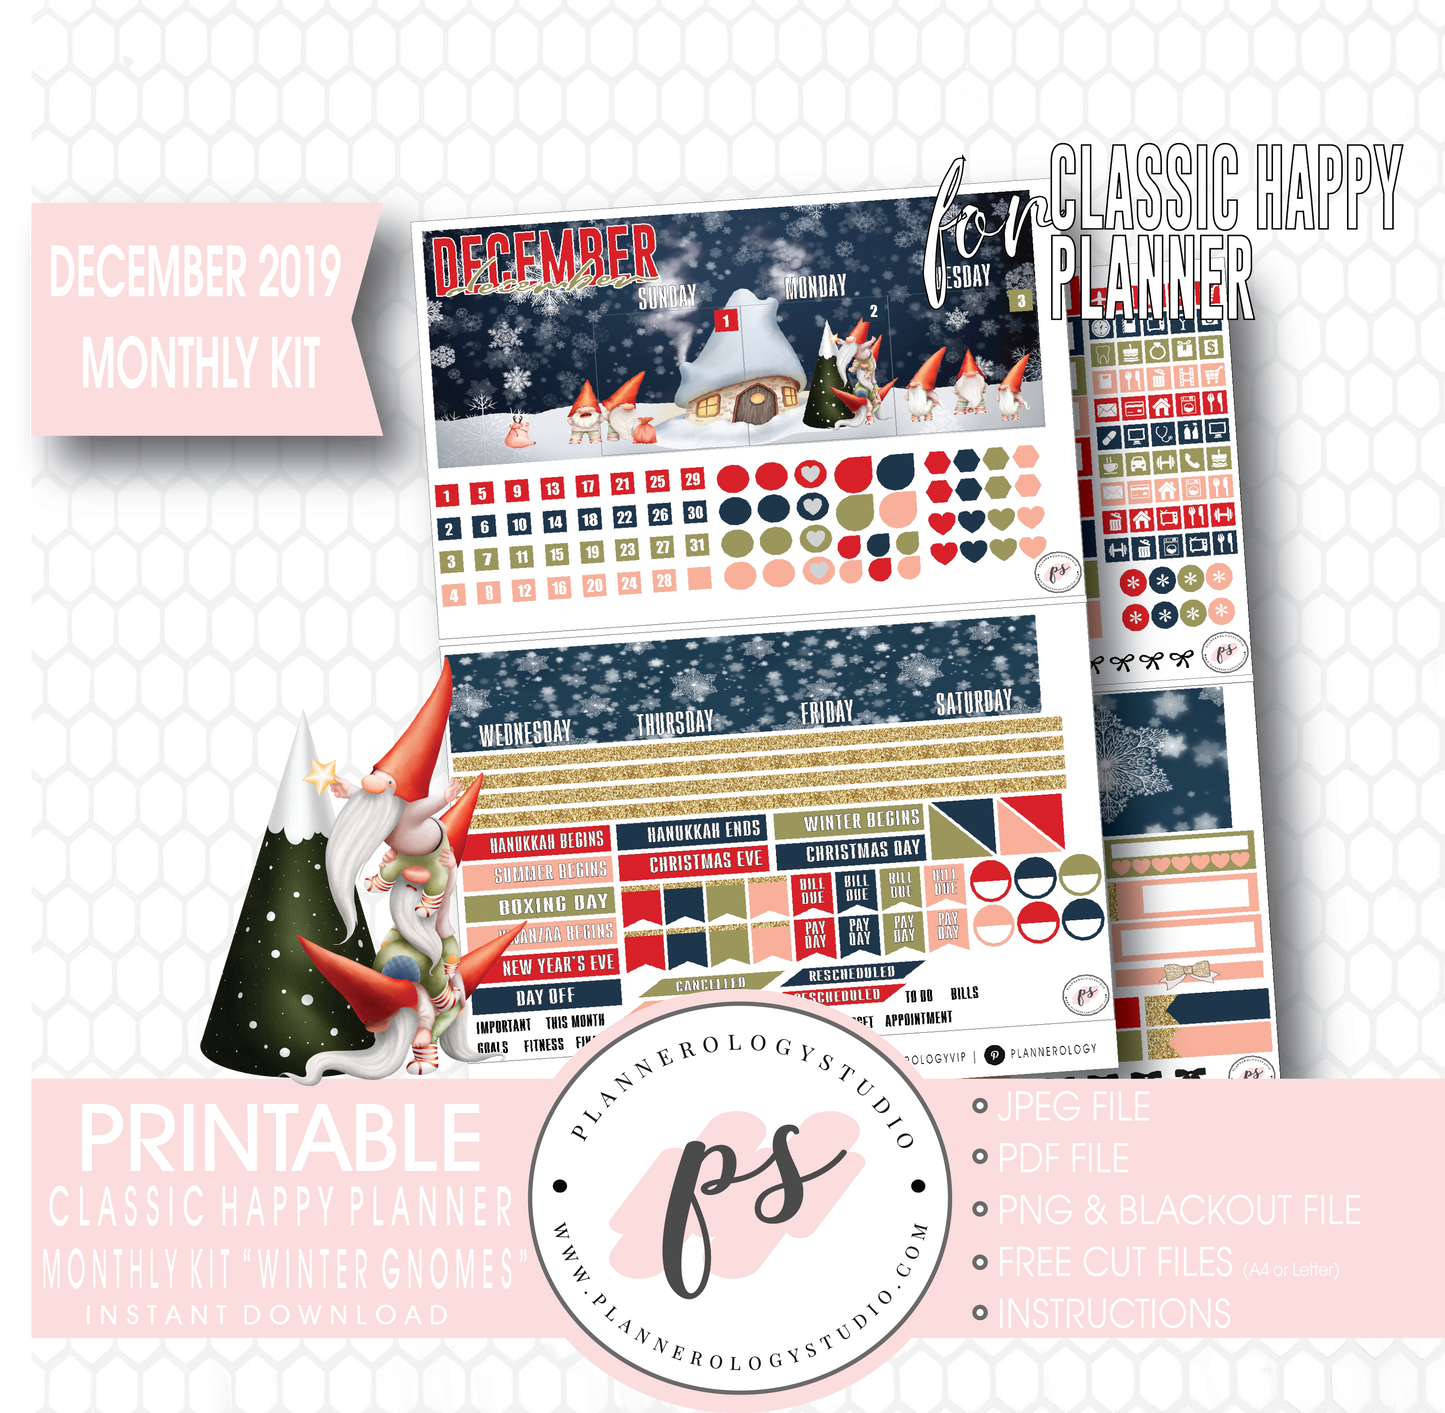 Winter Gnomes December 2019 Monthly View Kit Digital Printable Planner Stickers (for use with Classic Happy Planner) - Plannerologystudio